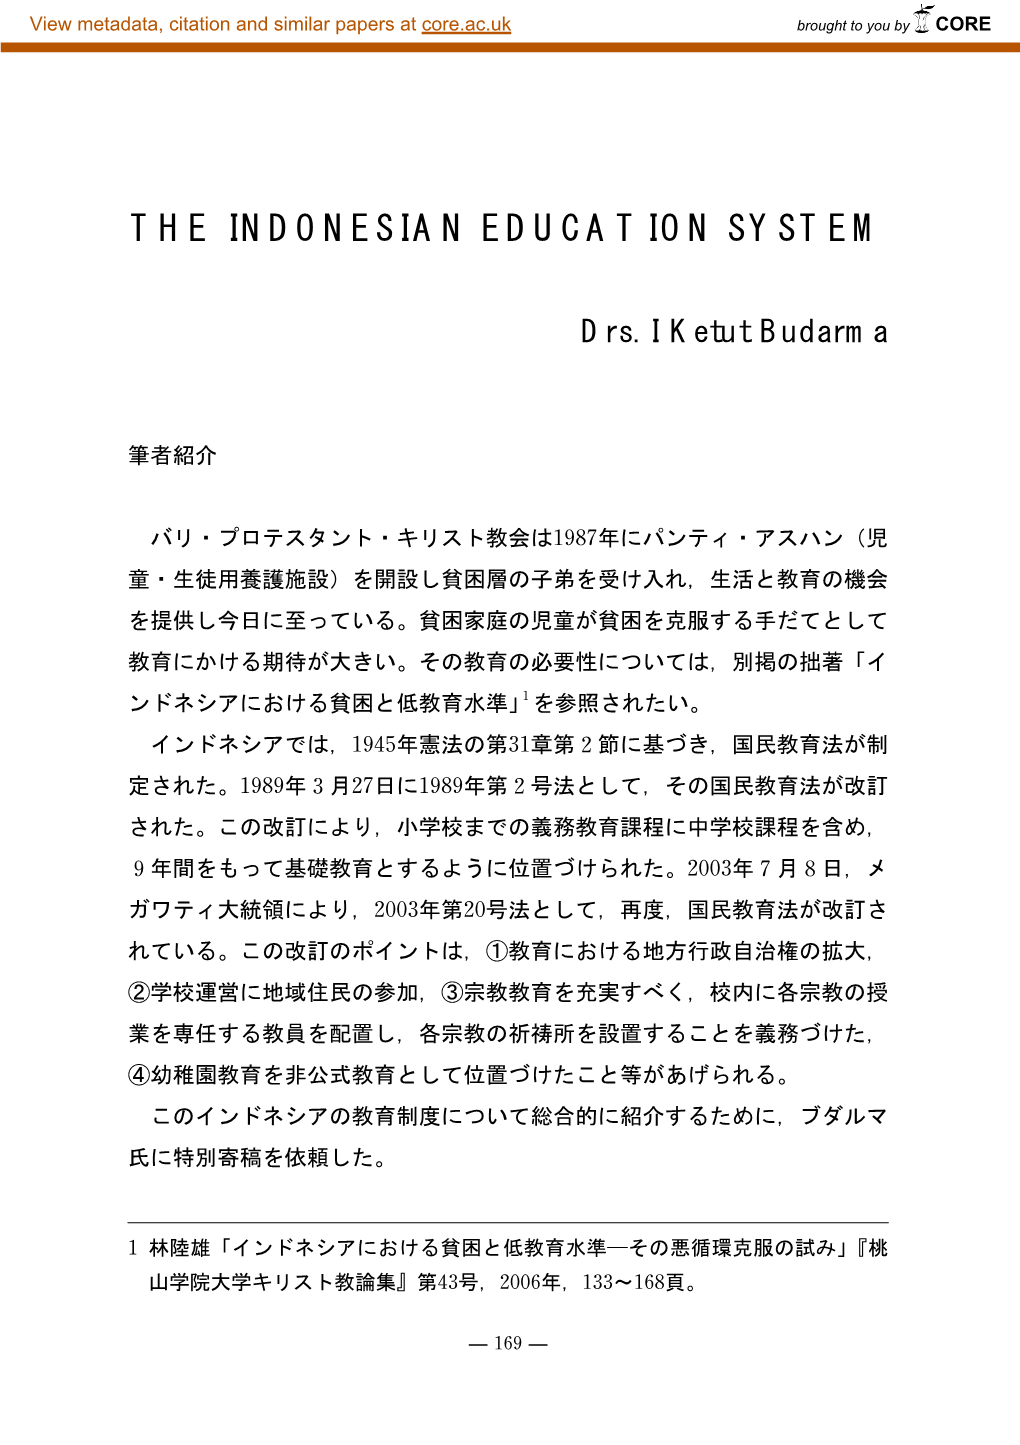 The Indonesian Education System